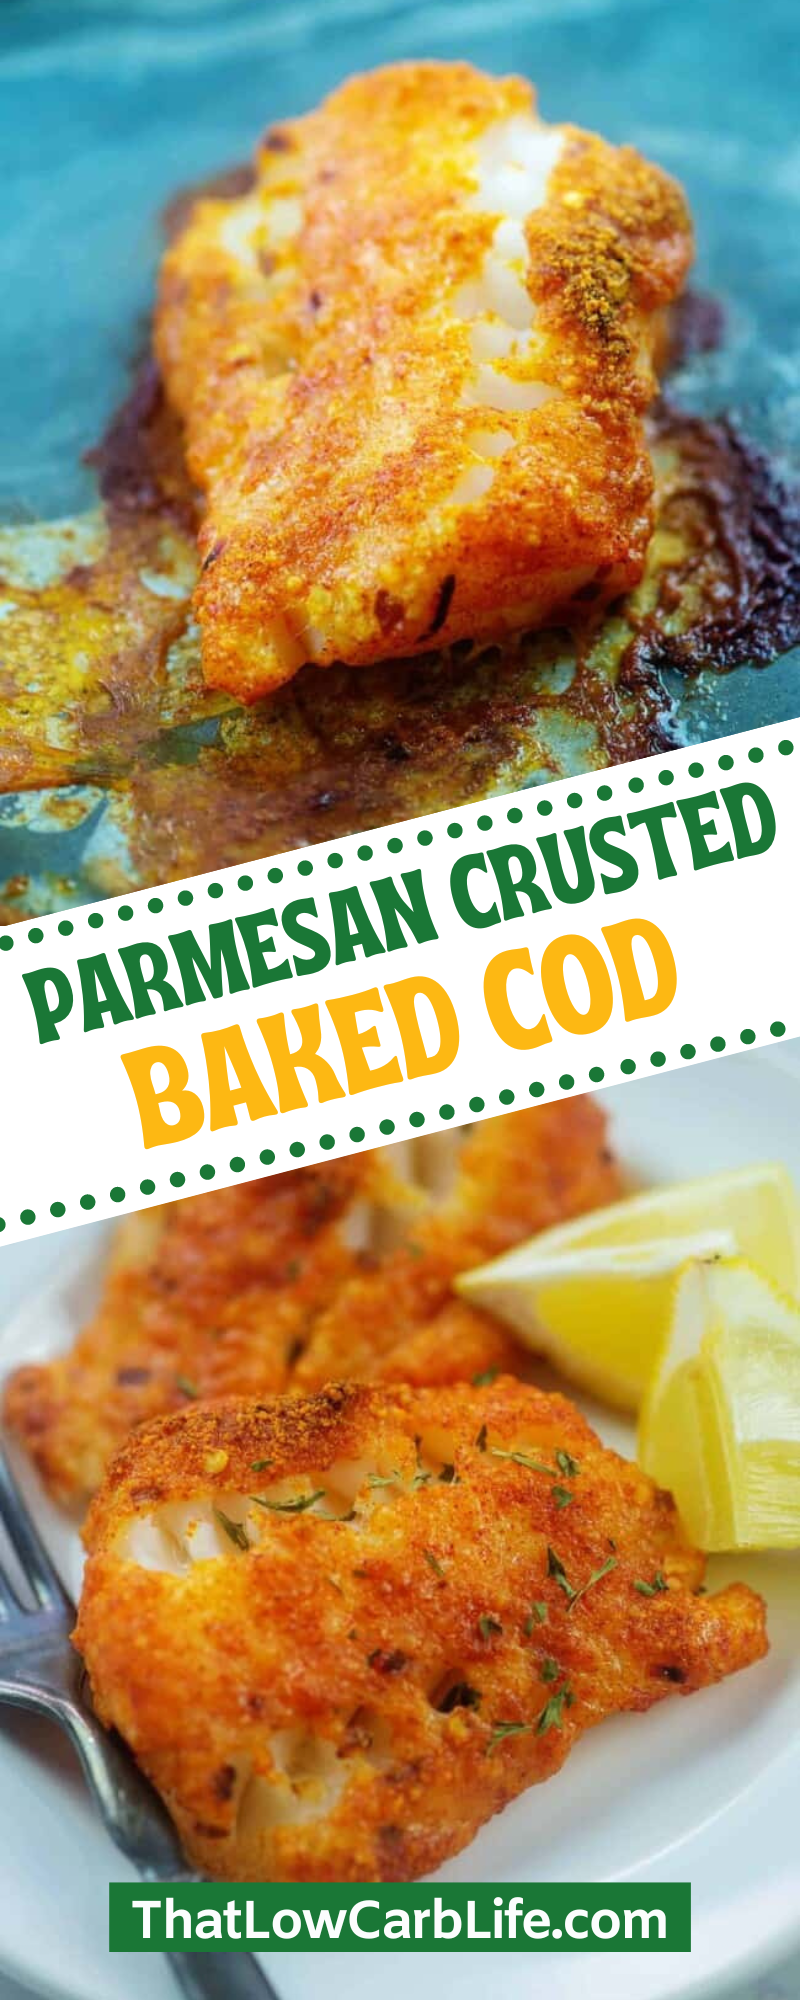 Parmesan Crusted Baked Cod